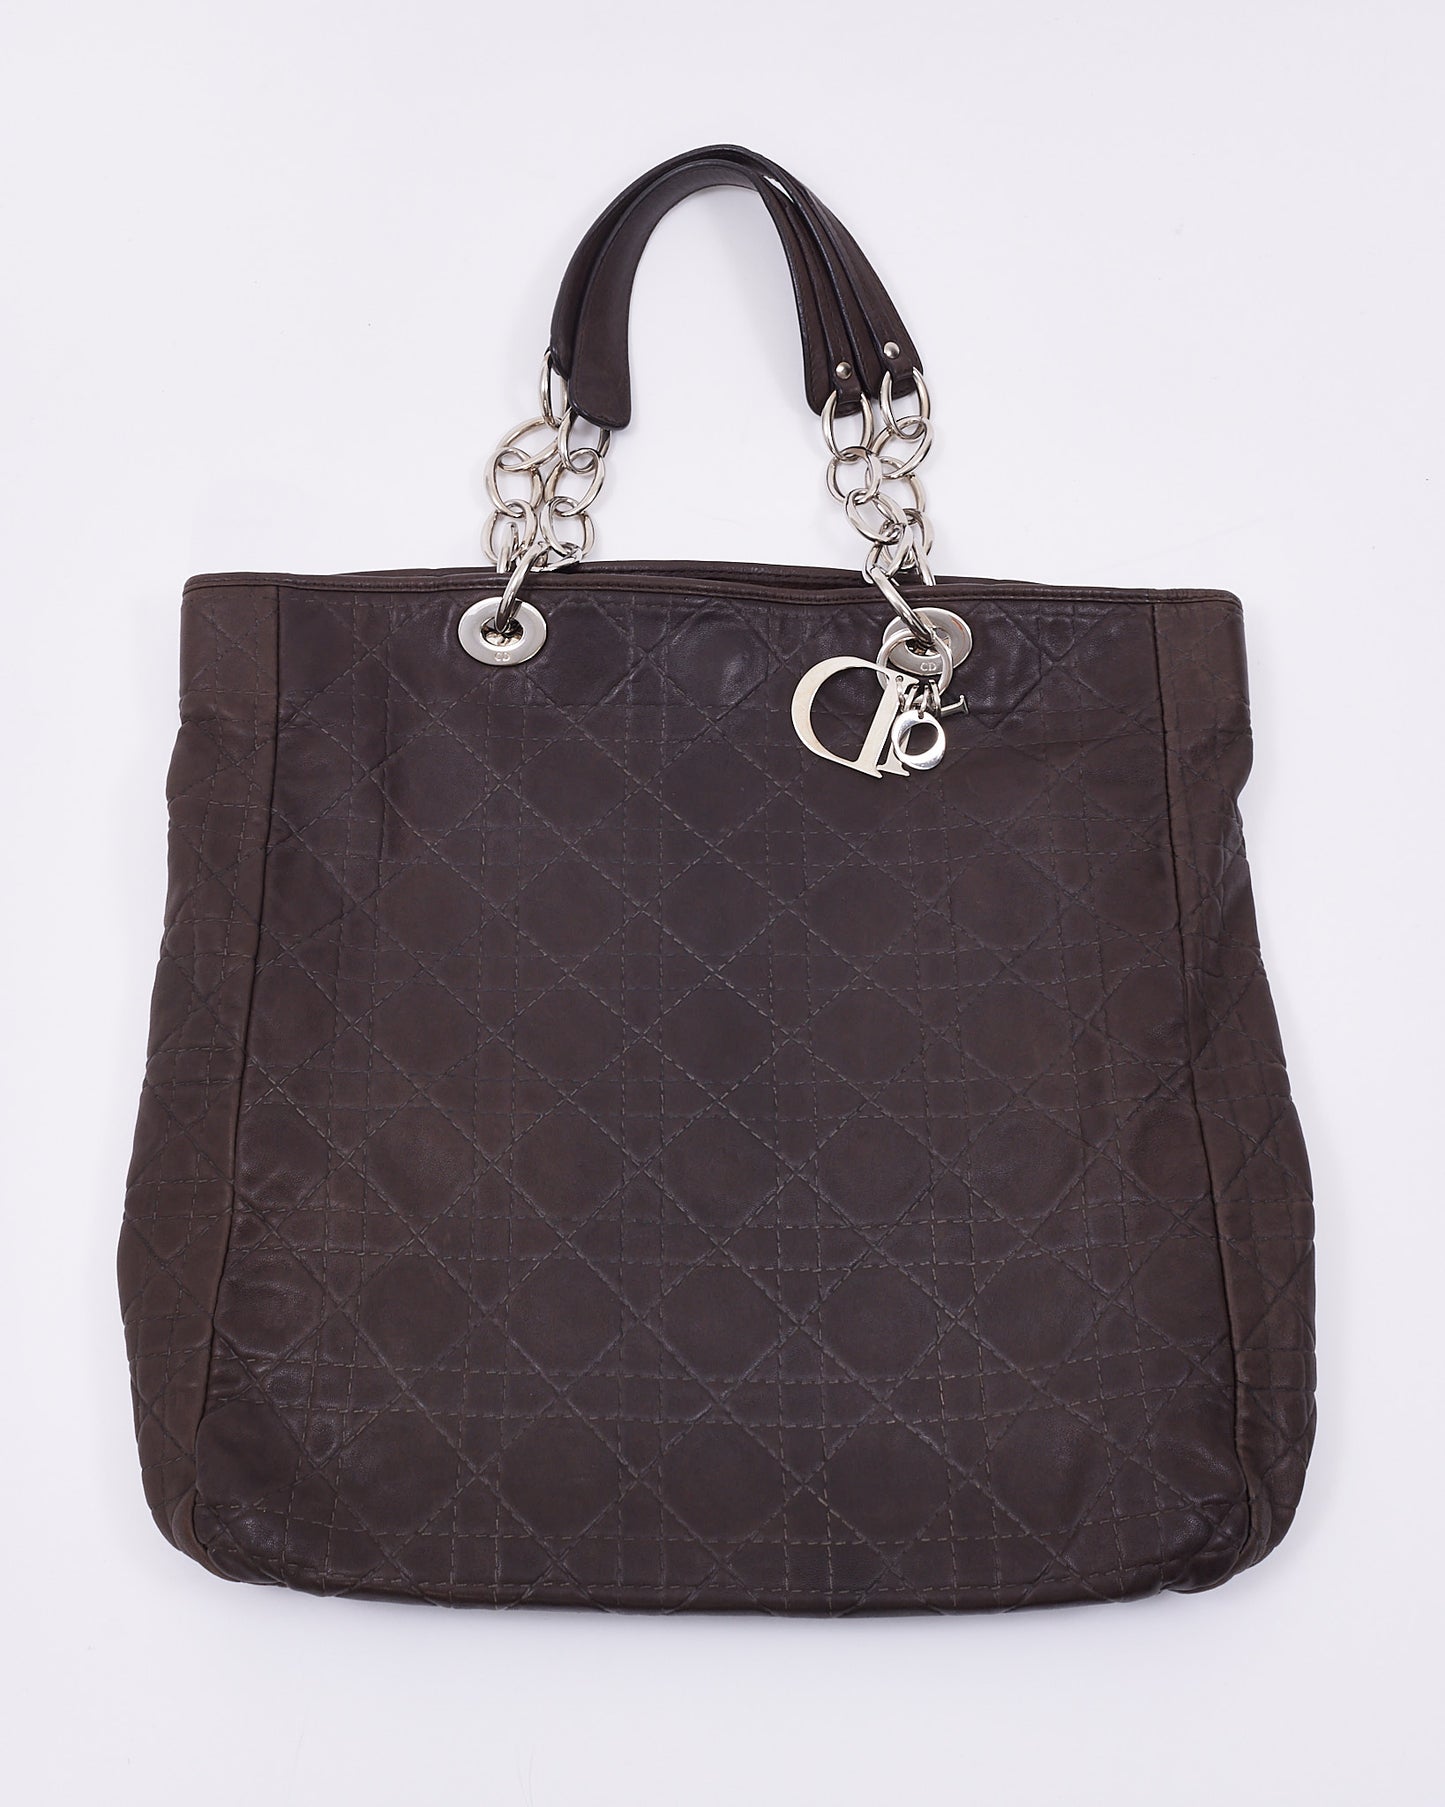 Dior Brown Cannage Soft Leather Shopping Tote